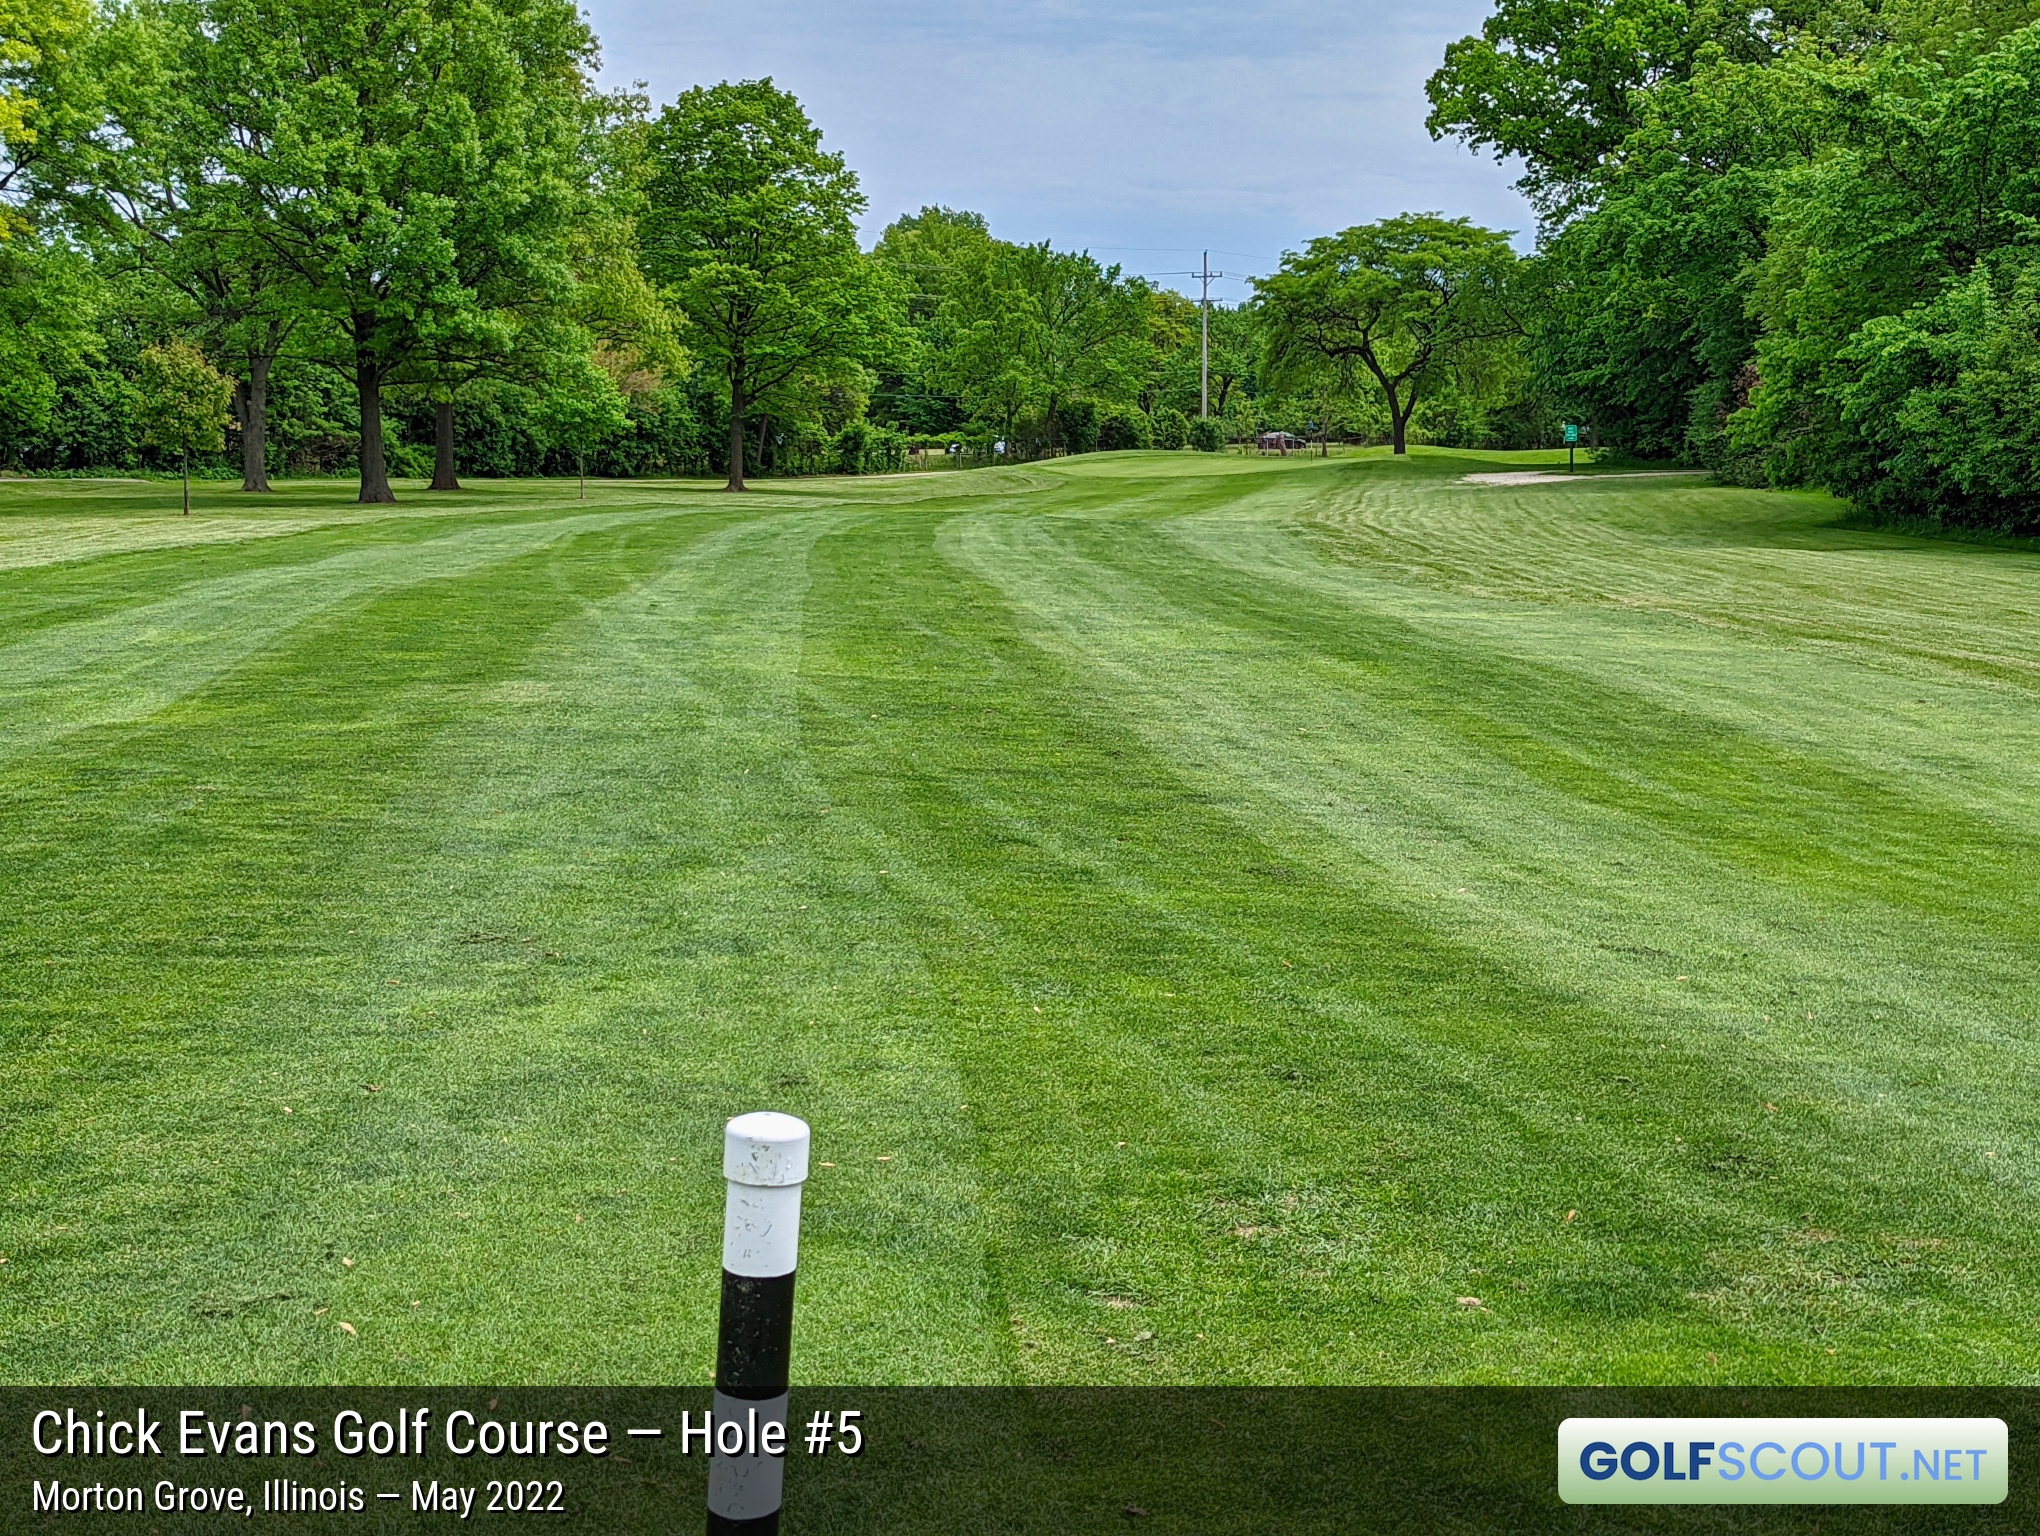 Photo of hole #5 at Chick Evans Golf Course in Morton Grove, Illinois. 